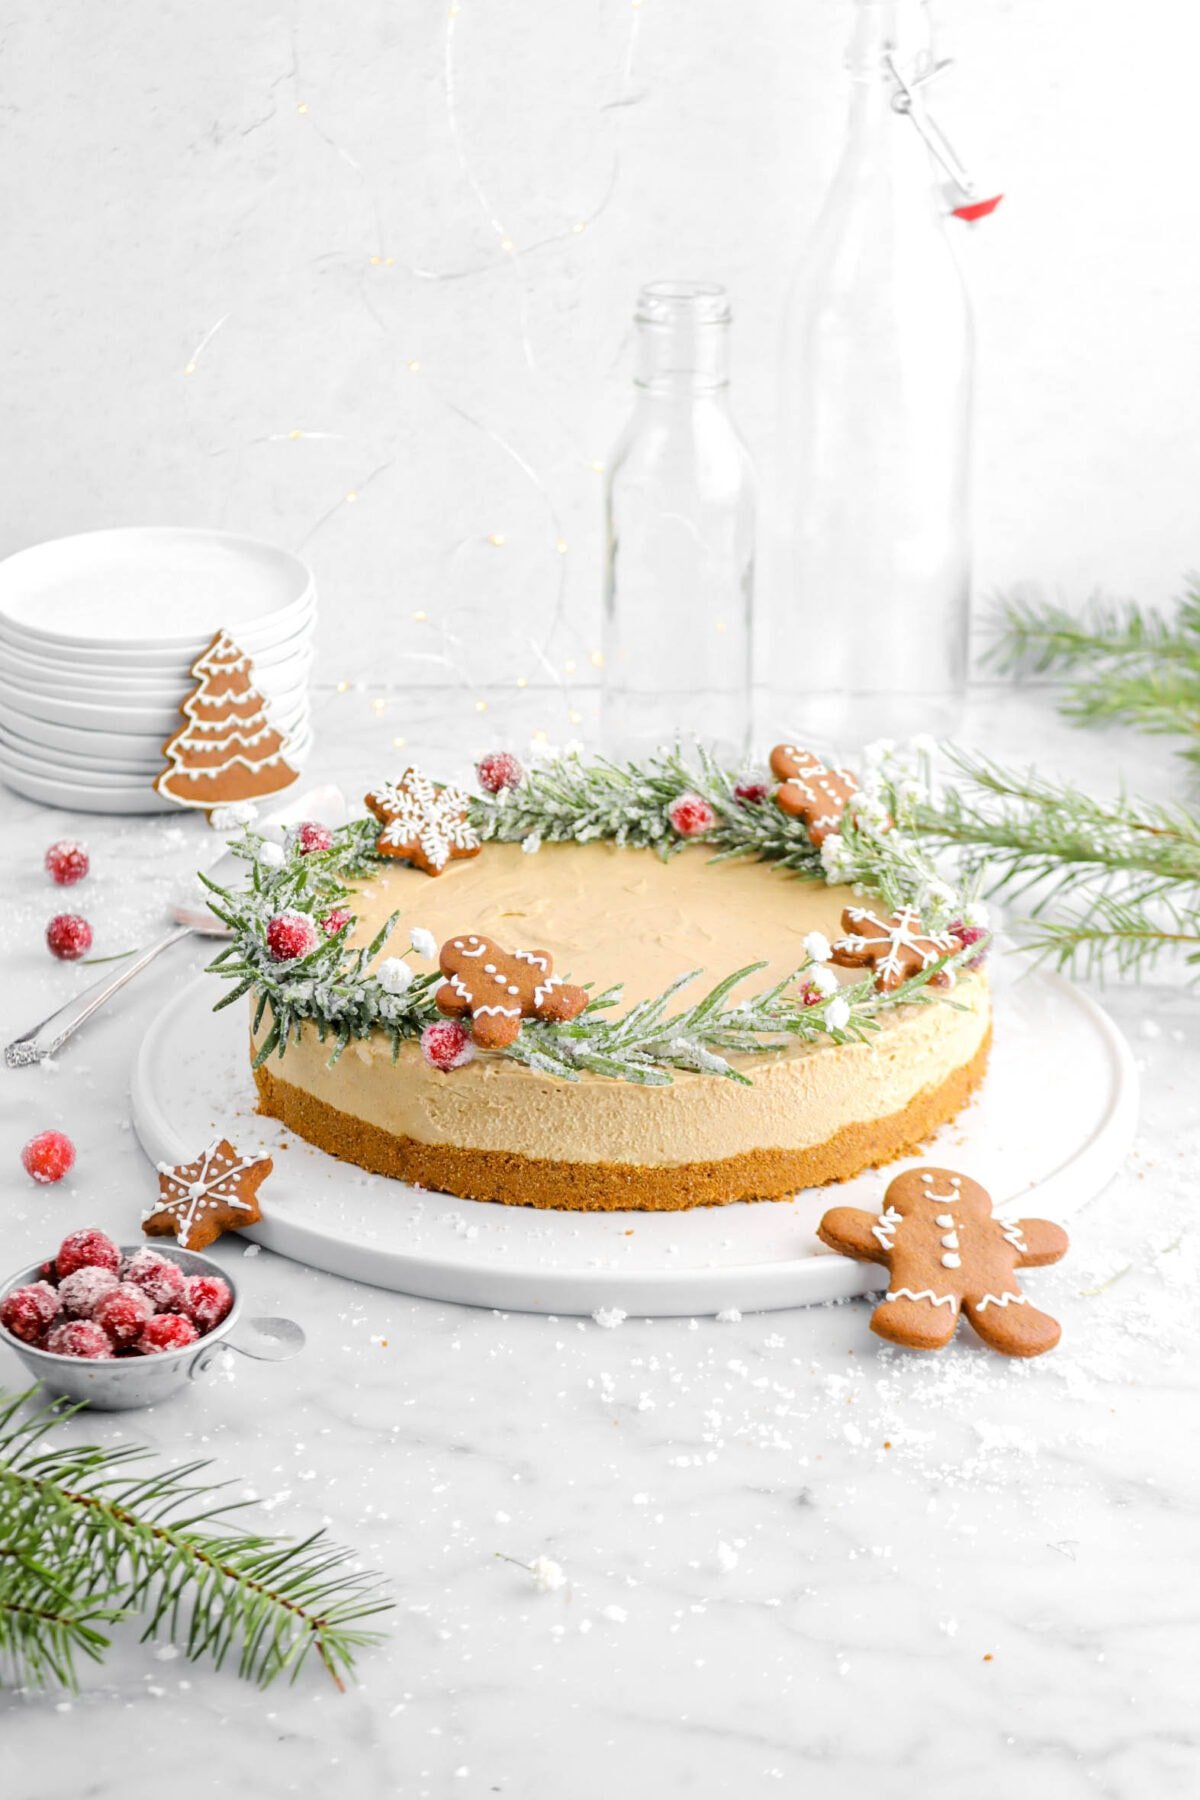 gingerbread cheesecake on round white tray with rosemary crown, sugared cranberries, and mini gingerbread on top with greenery, stack of plates, more sugared cranberries around on marble surface.